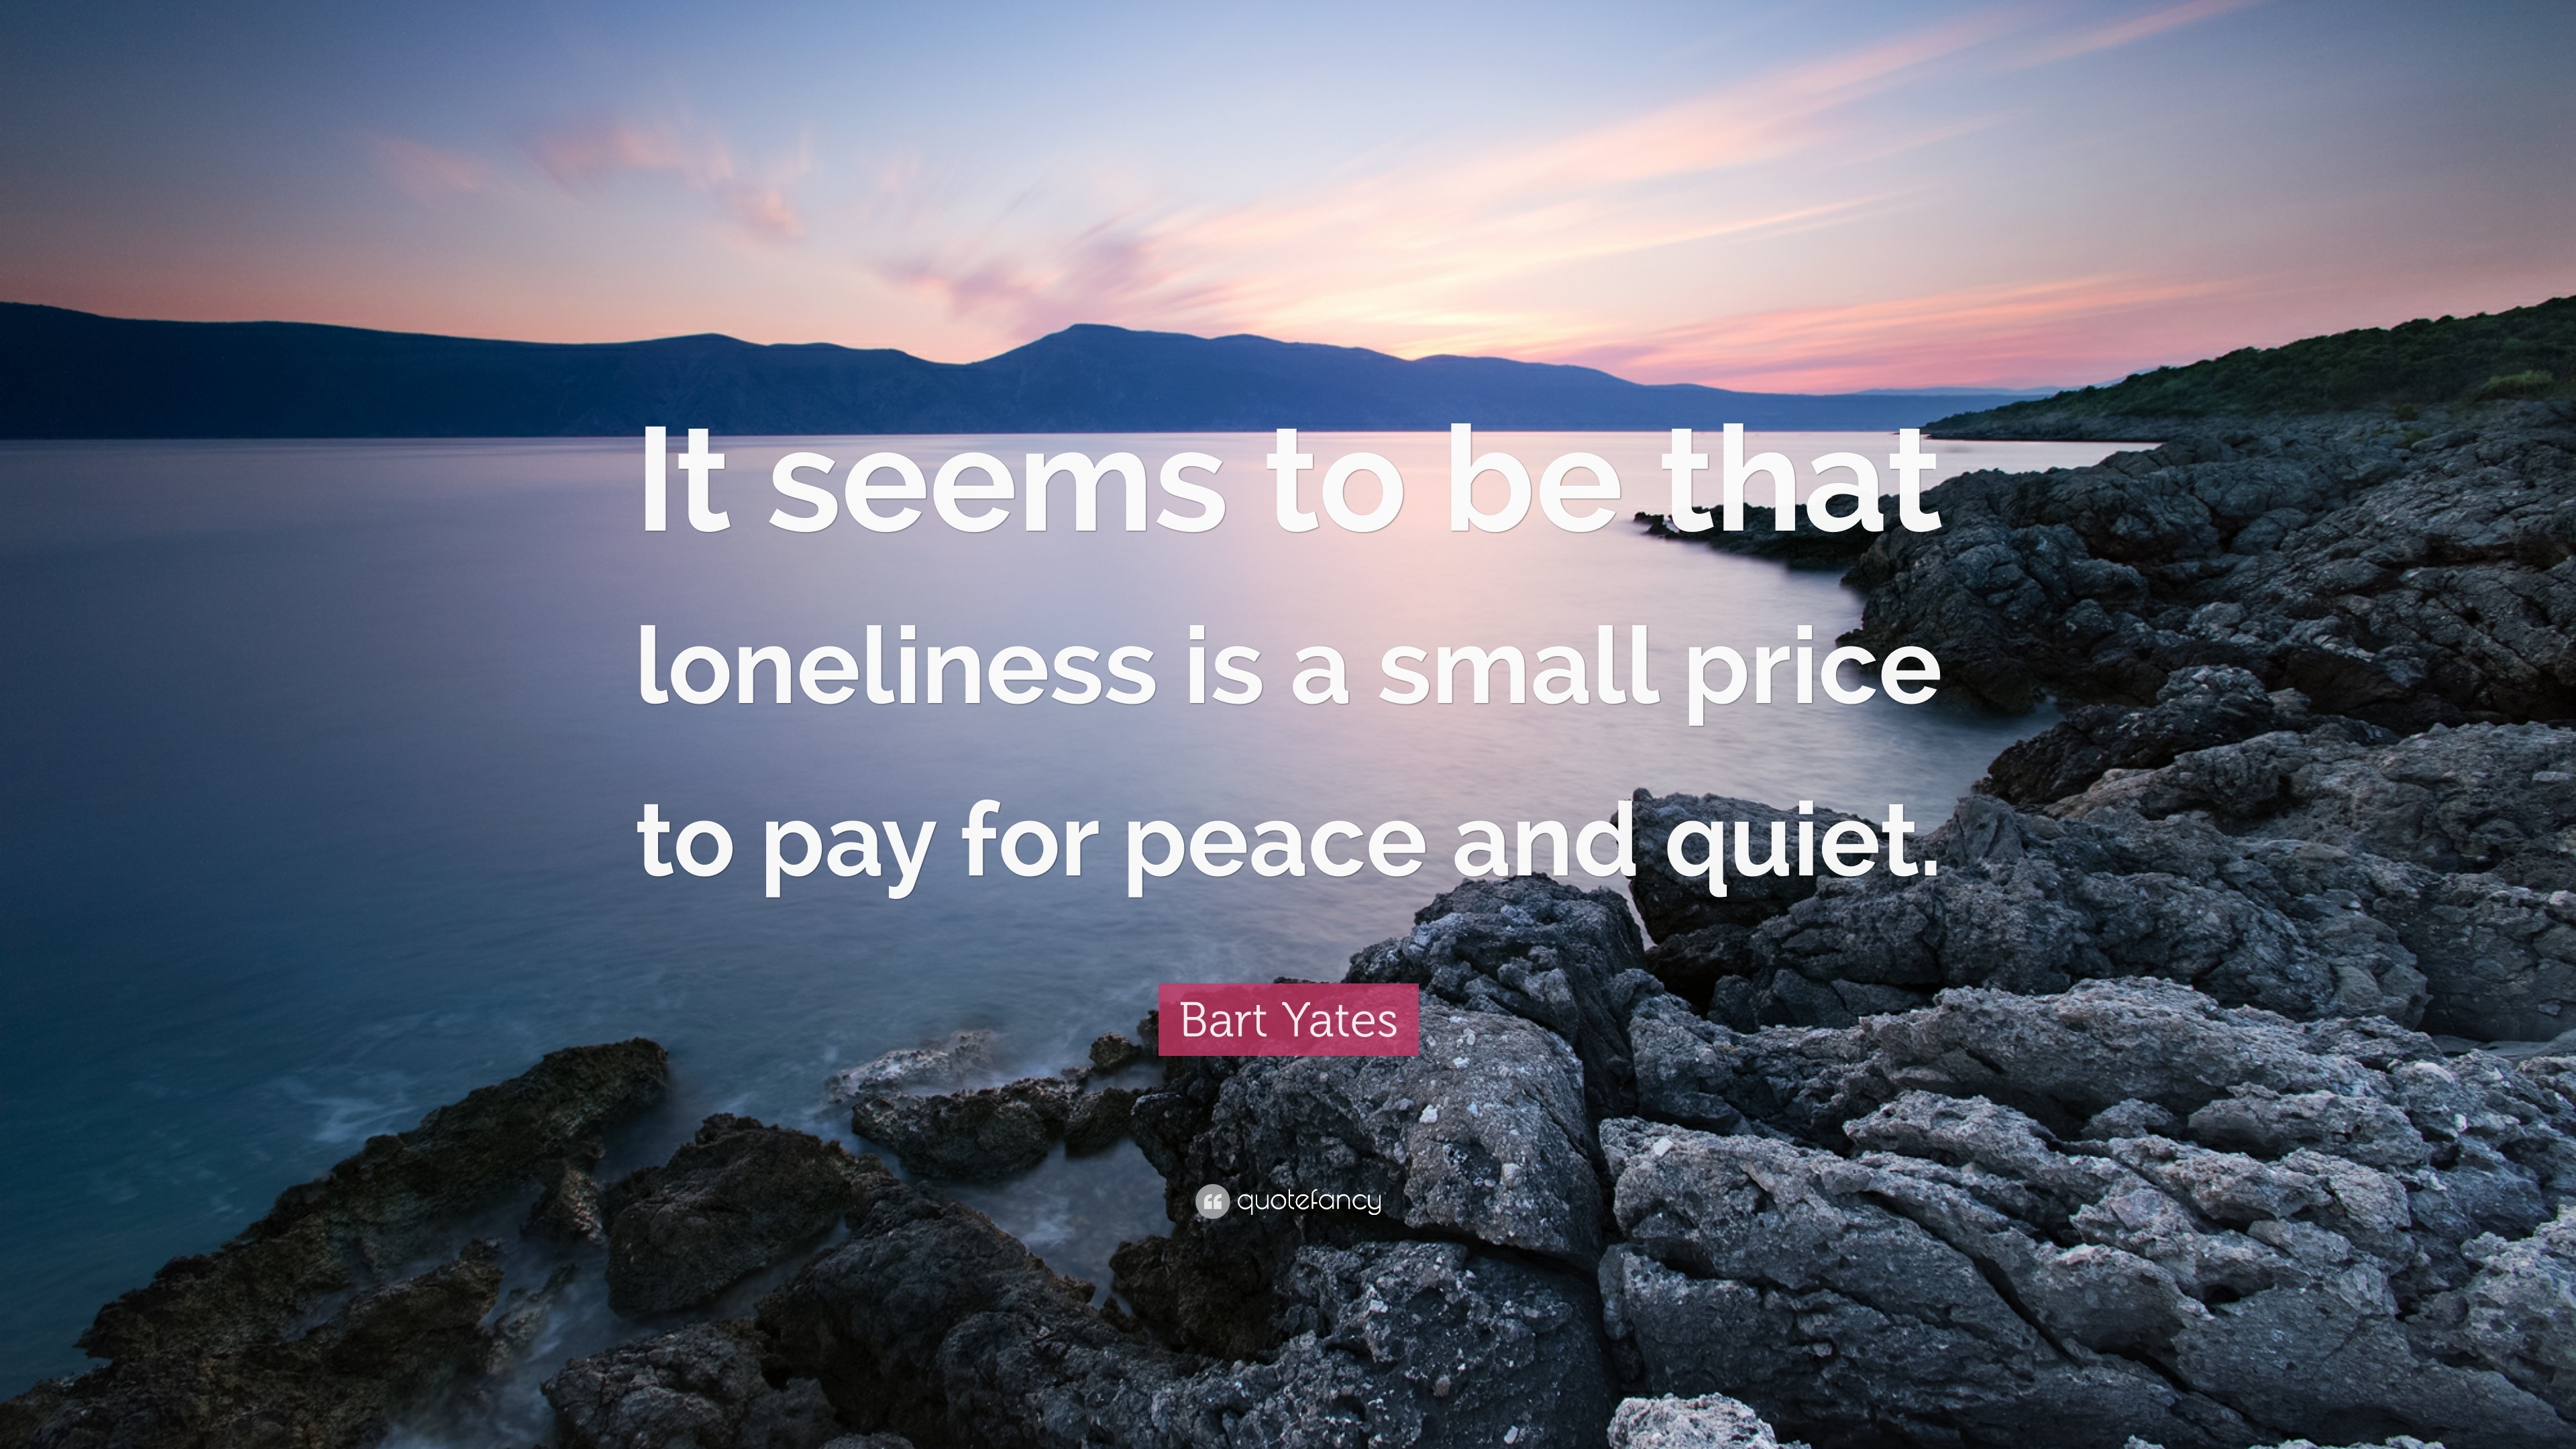 Bart Yates Quote: “It seems to be that loneliness is a small price to ...